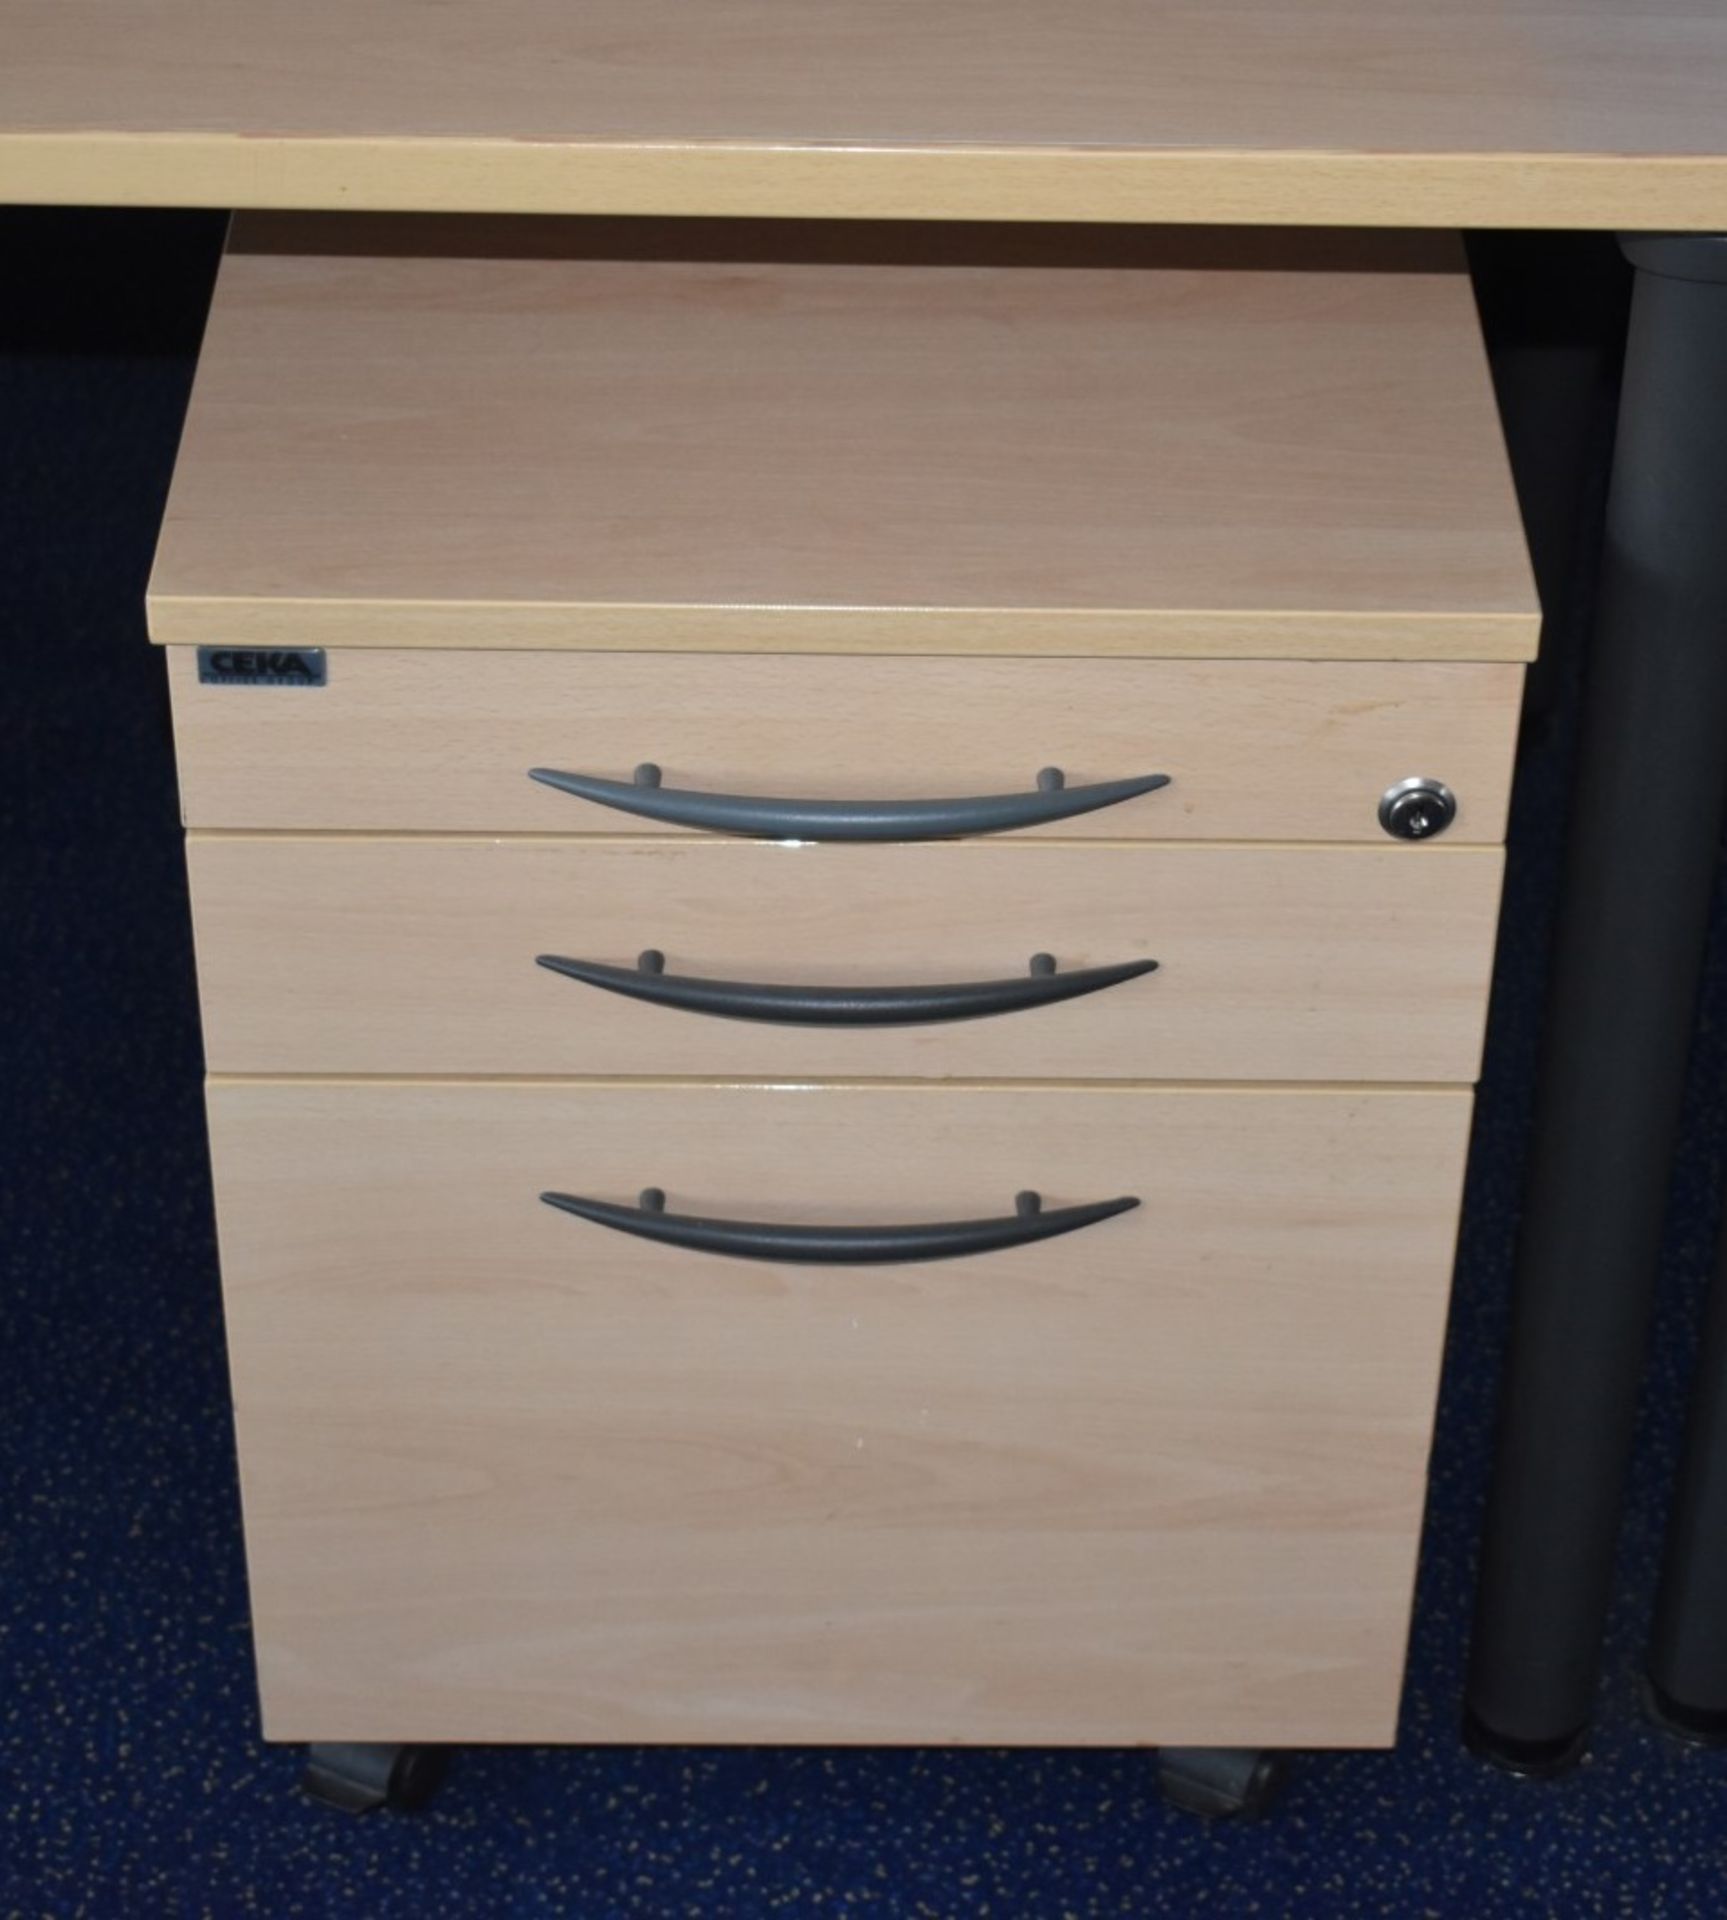 8 x Beech Office Desks With Drawer Pedestals and Privacy Partitions - H72 x W160 x D80 cms - Ref - Image 8 of 11